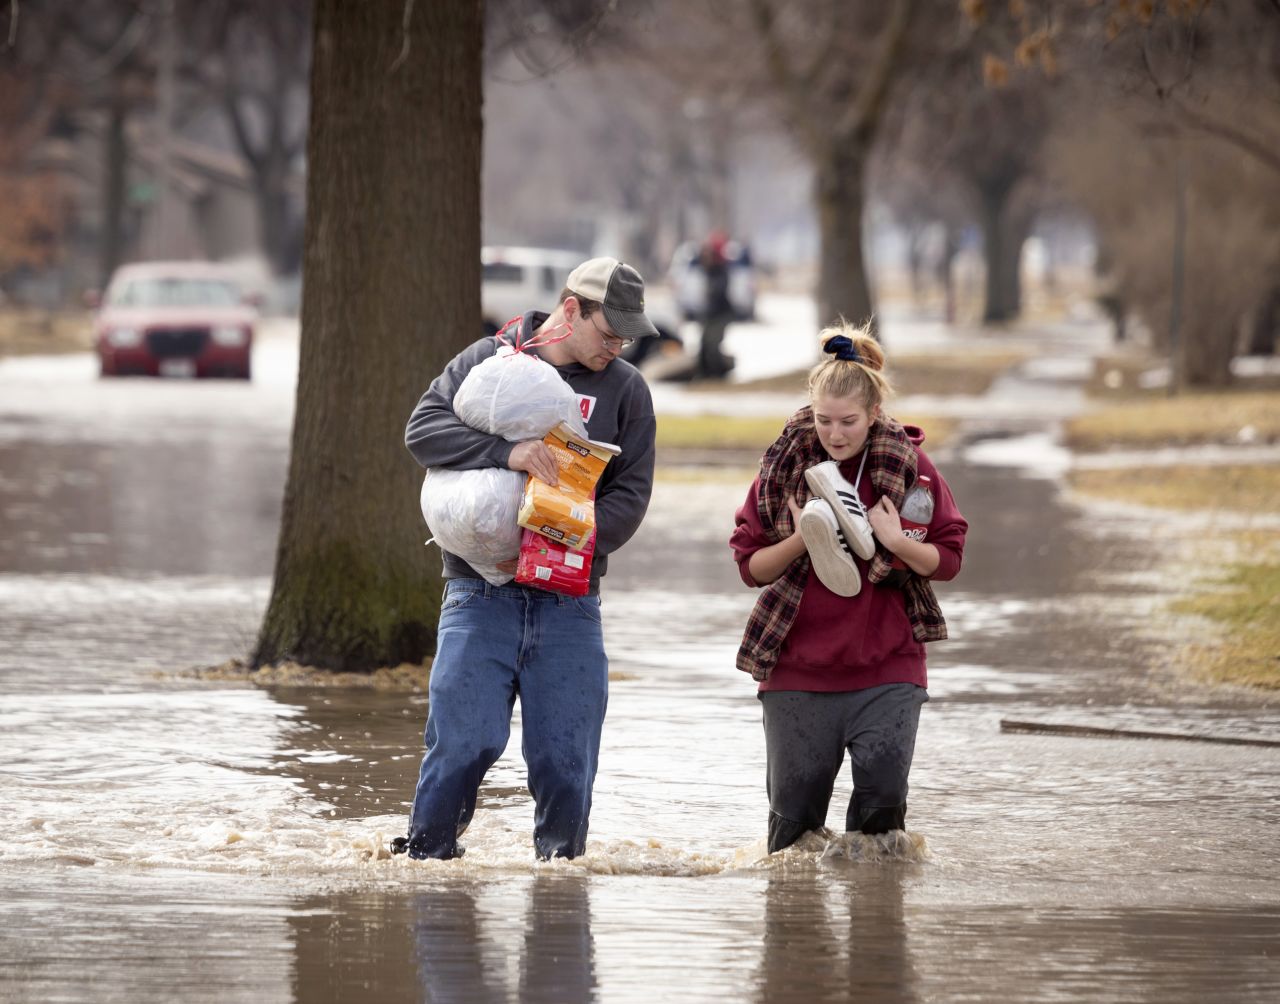 Anthony Thomson, left, and Melody Walton make their way out of a flooded neighborhood in Fremont on March 17.